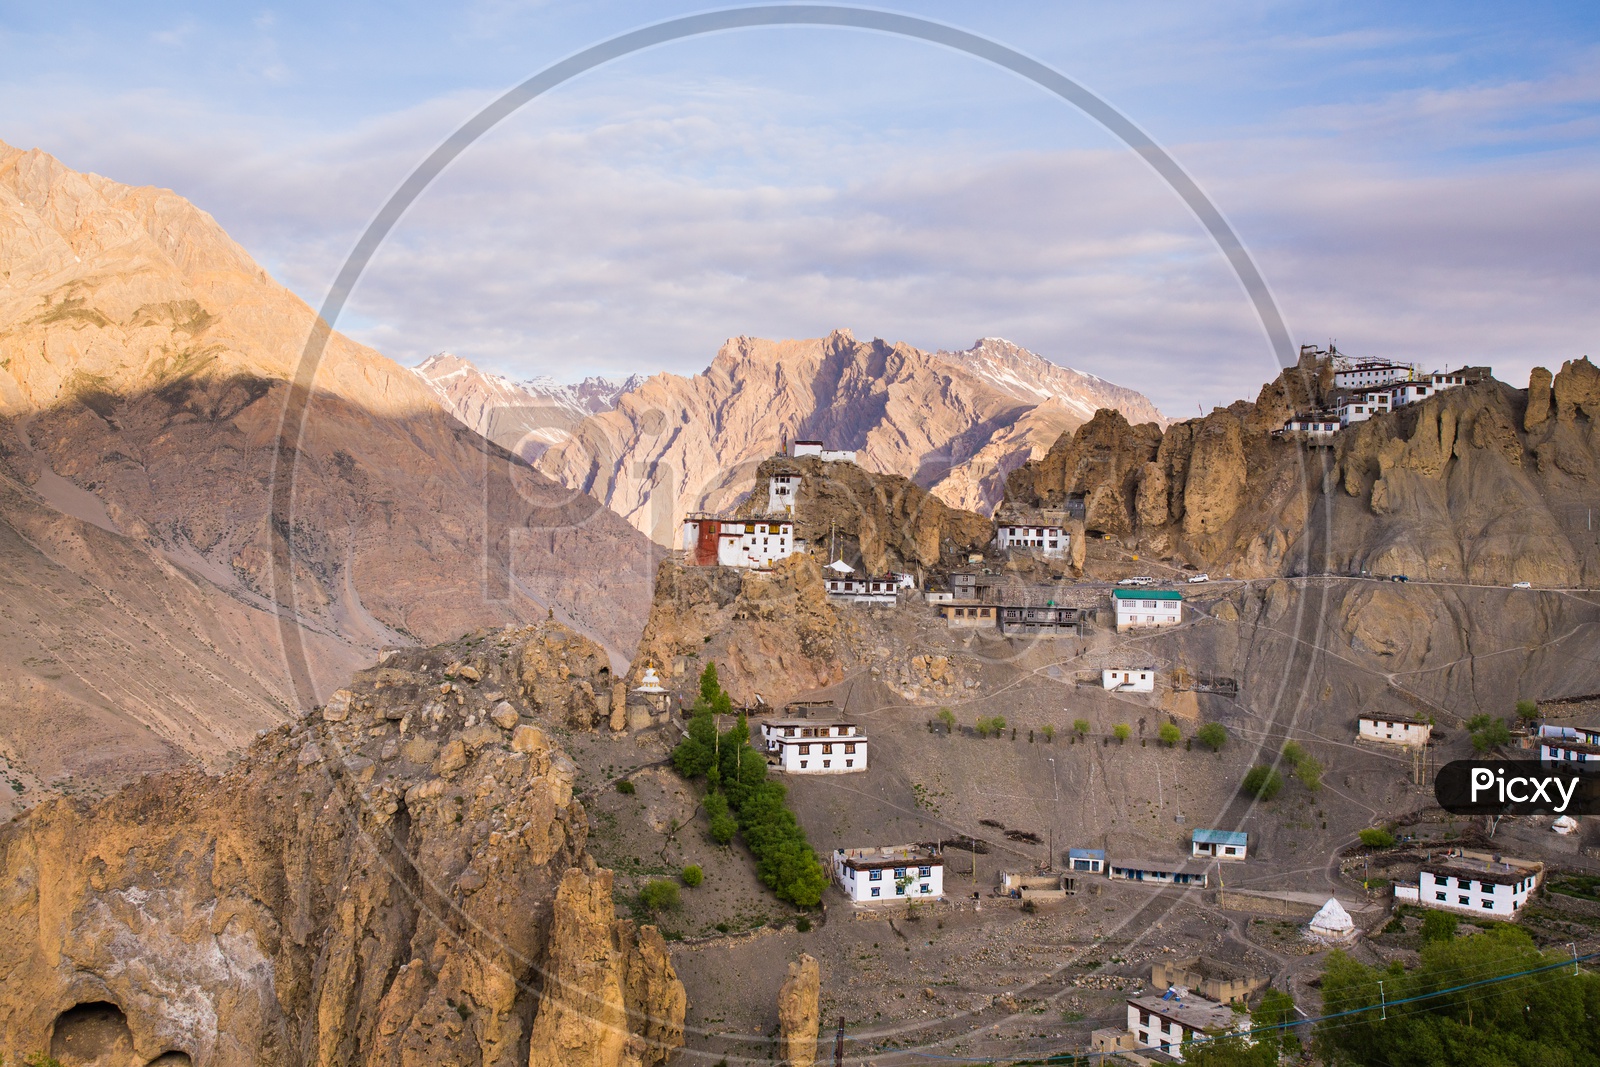 Houses On The Terrains Of Spiti Valley With Snow Capped Mountains In Background